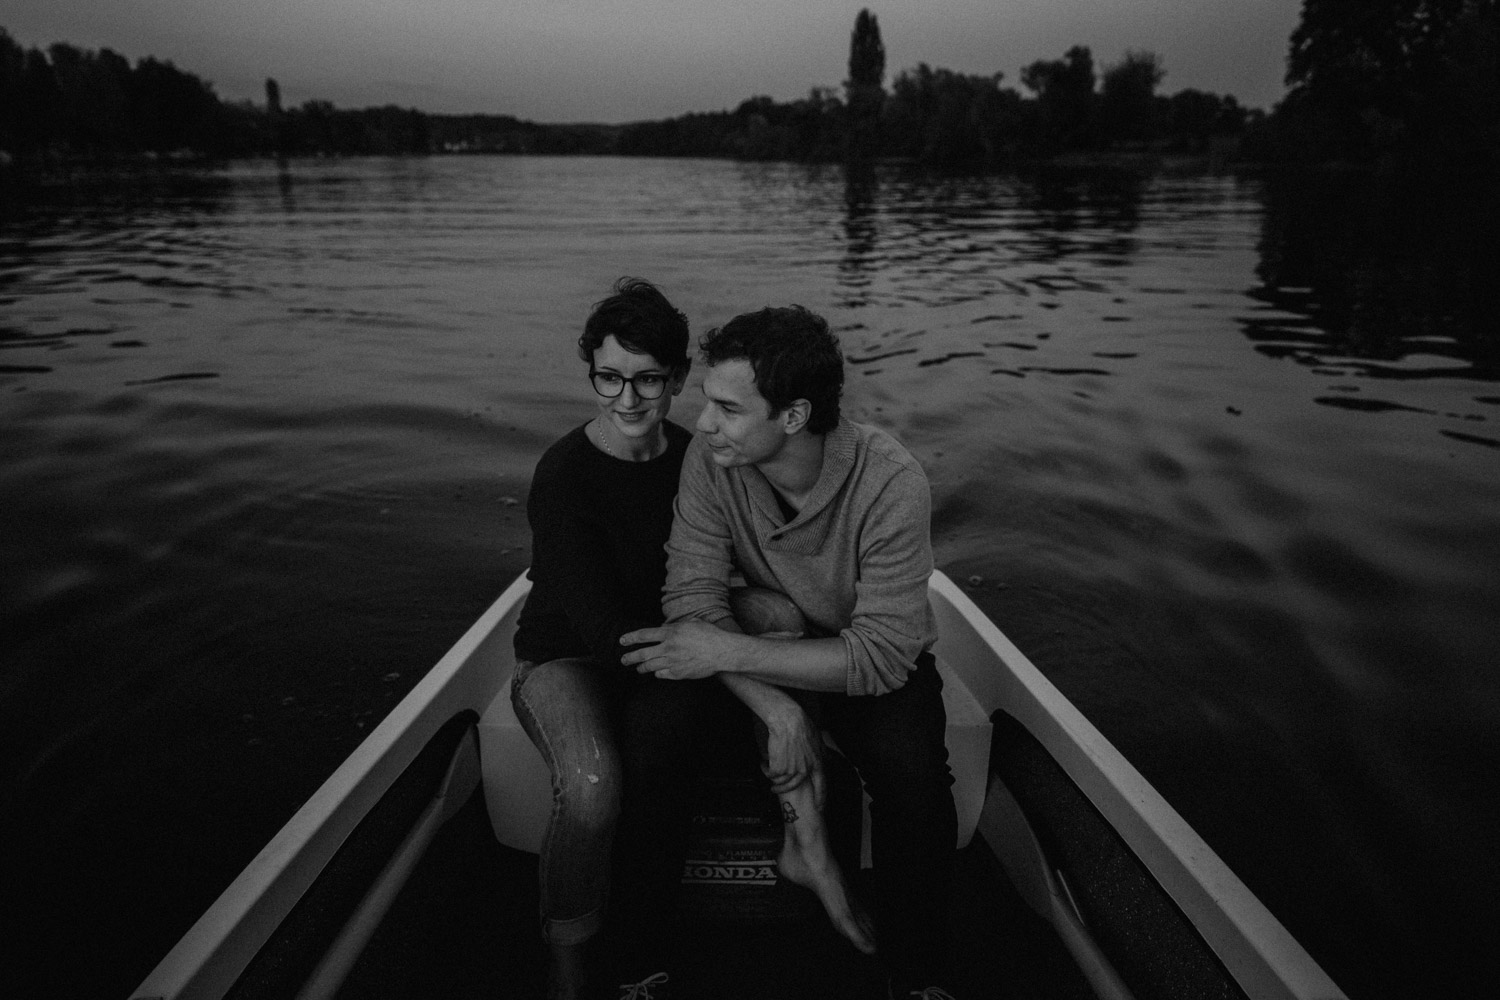 Couple shoot in Switzerland river rowing boat sunset summer whine romantic unposed natural